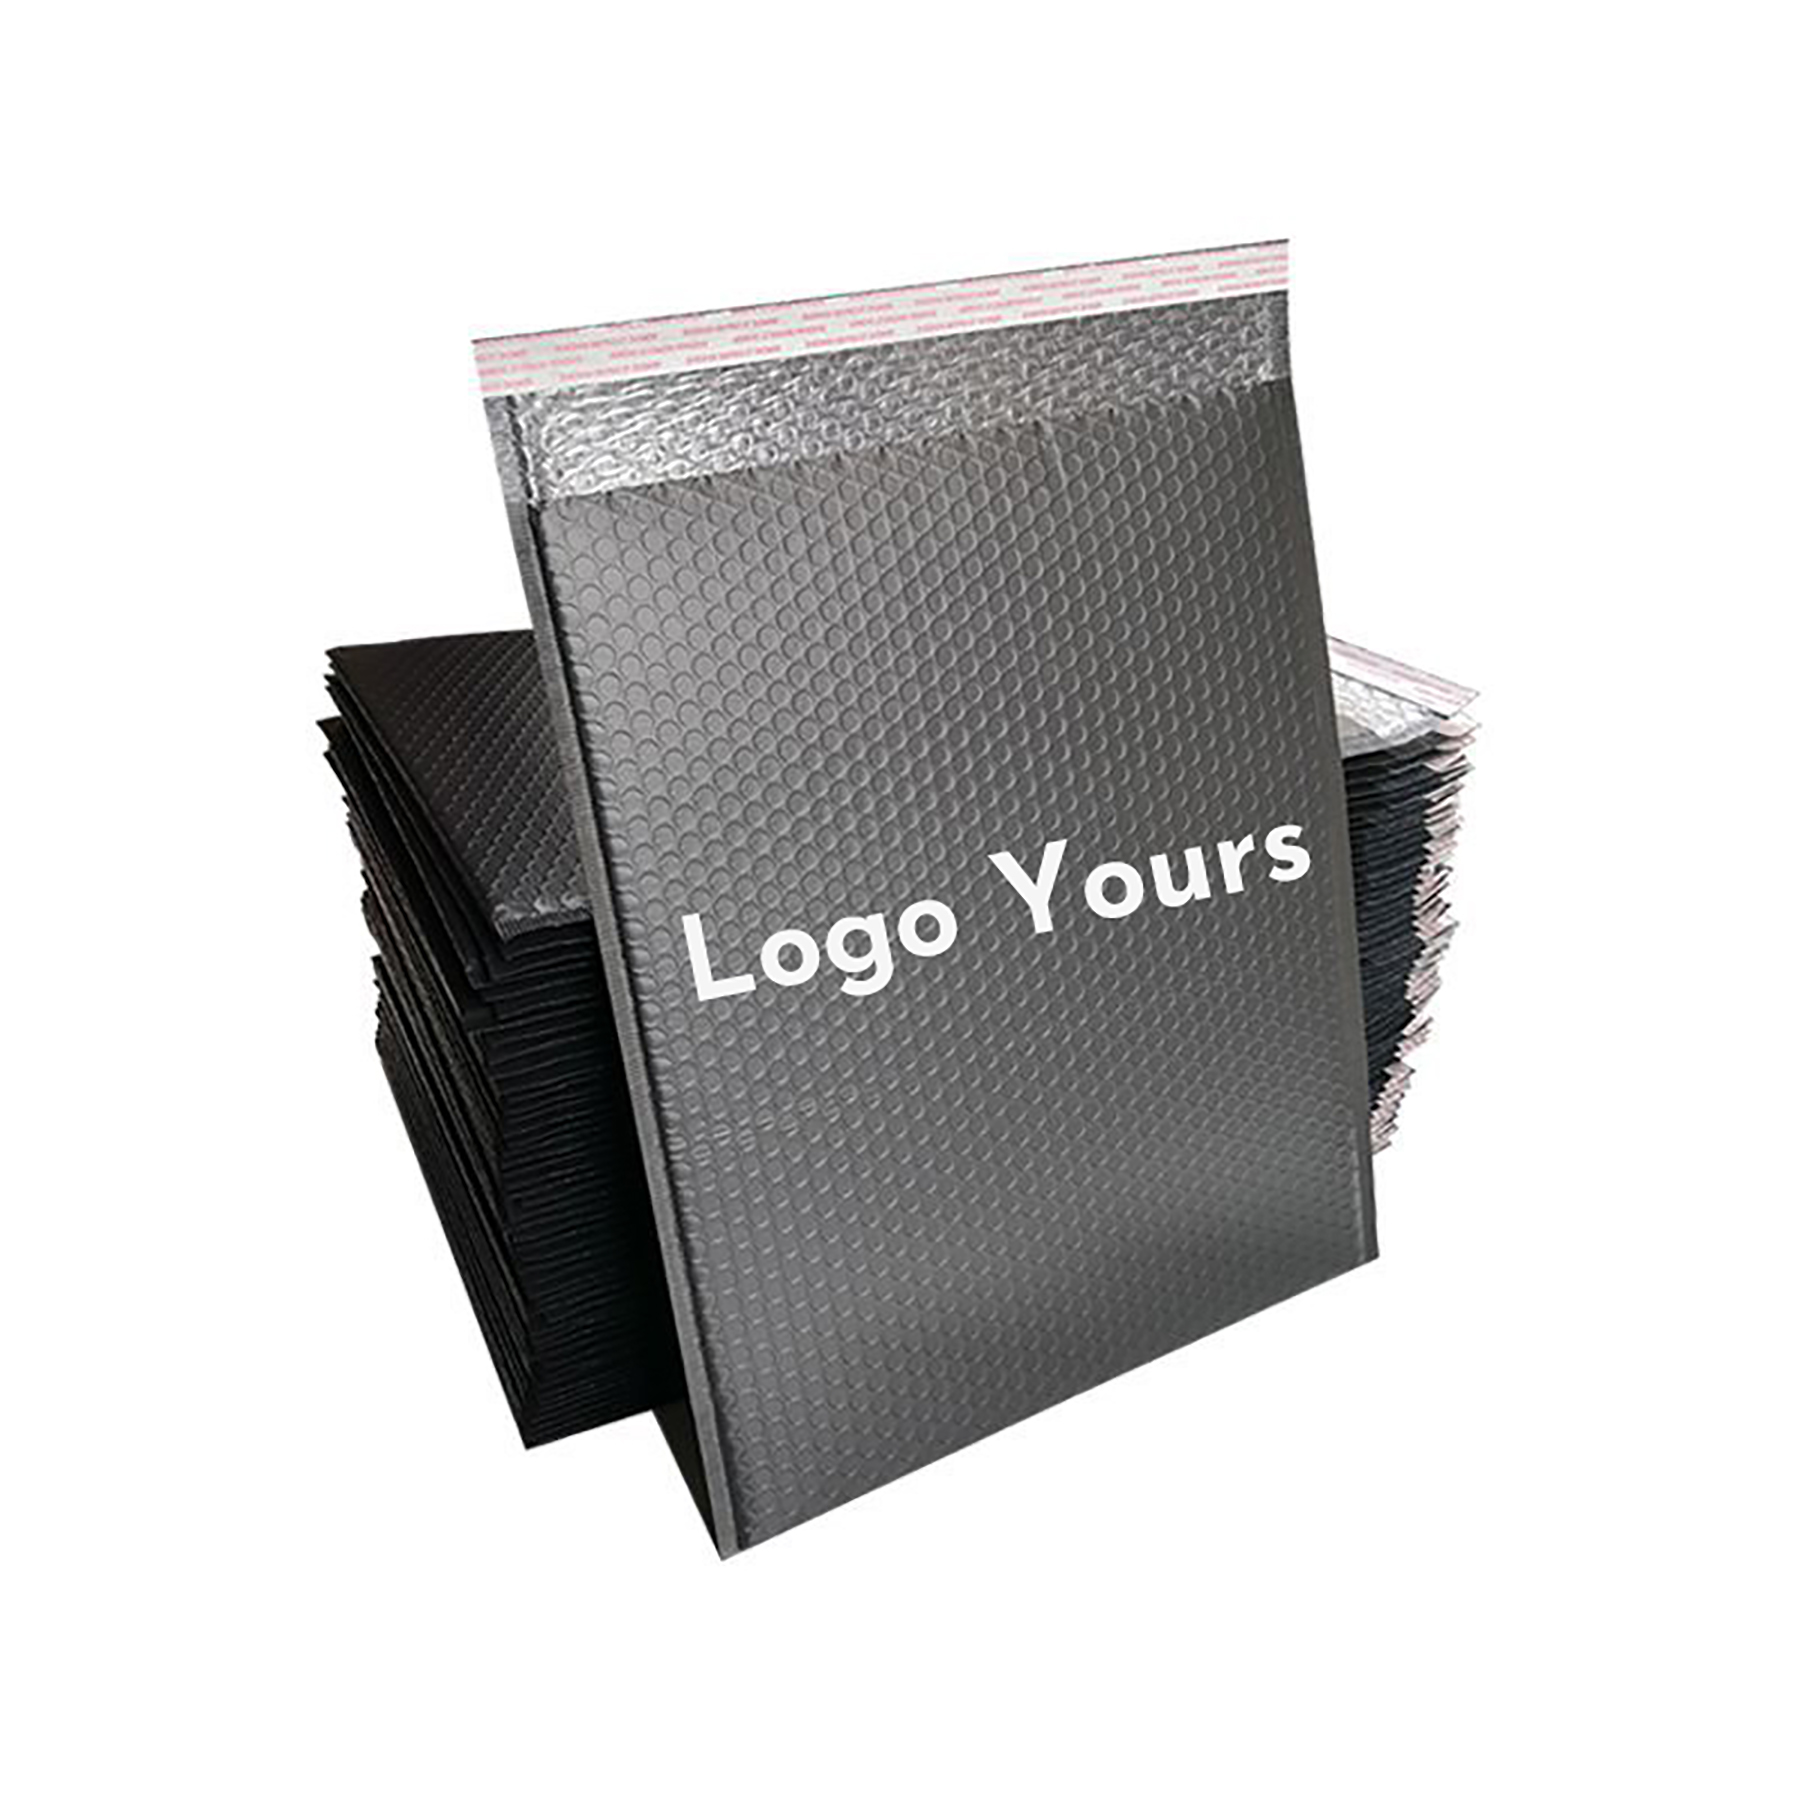 14 x 16 inch Matte Black Water-proof Poly Bubble Padded Envelope Mailer